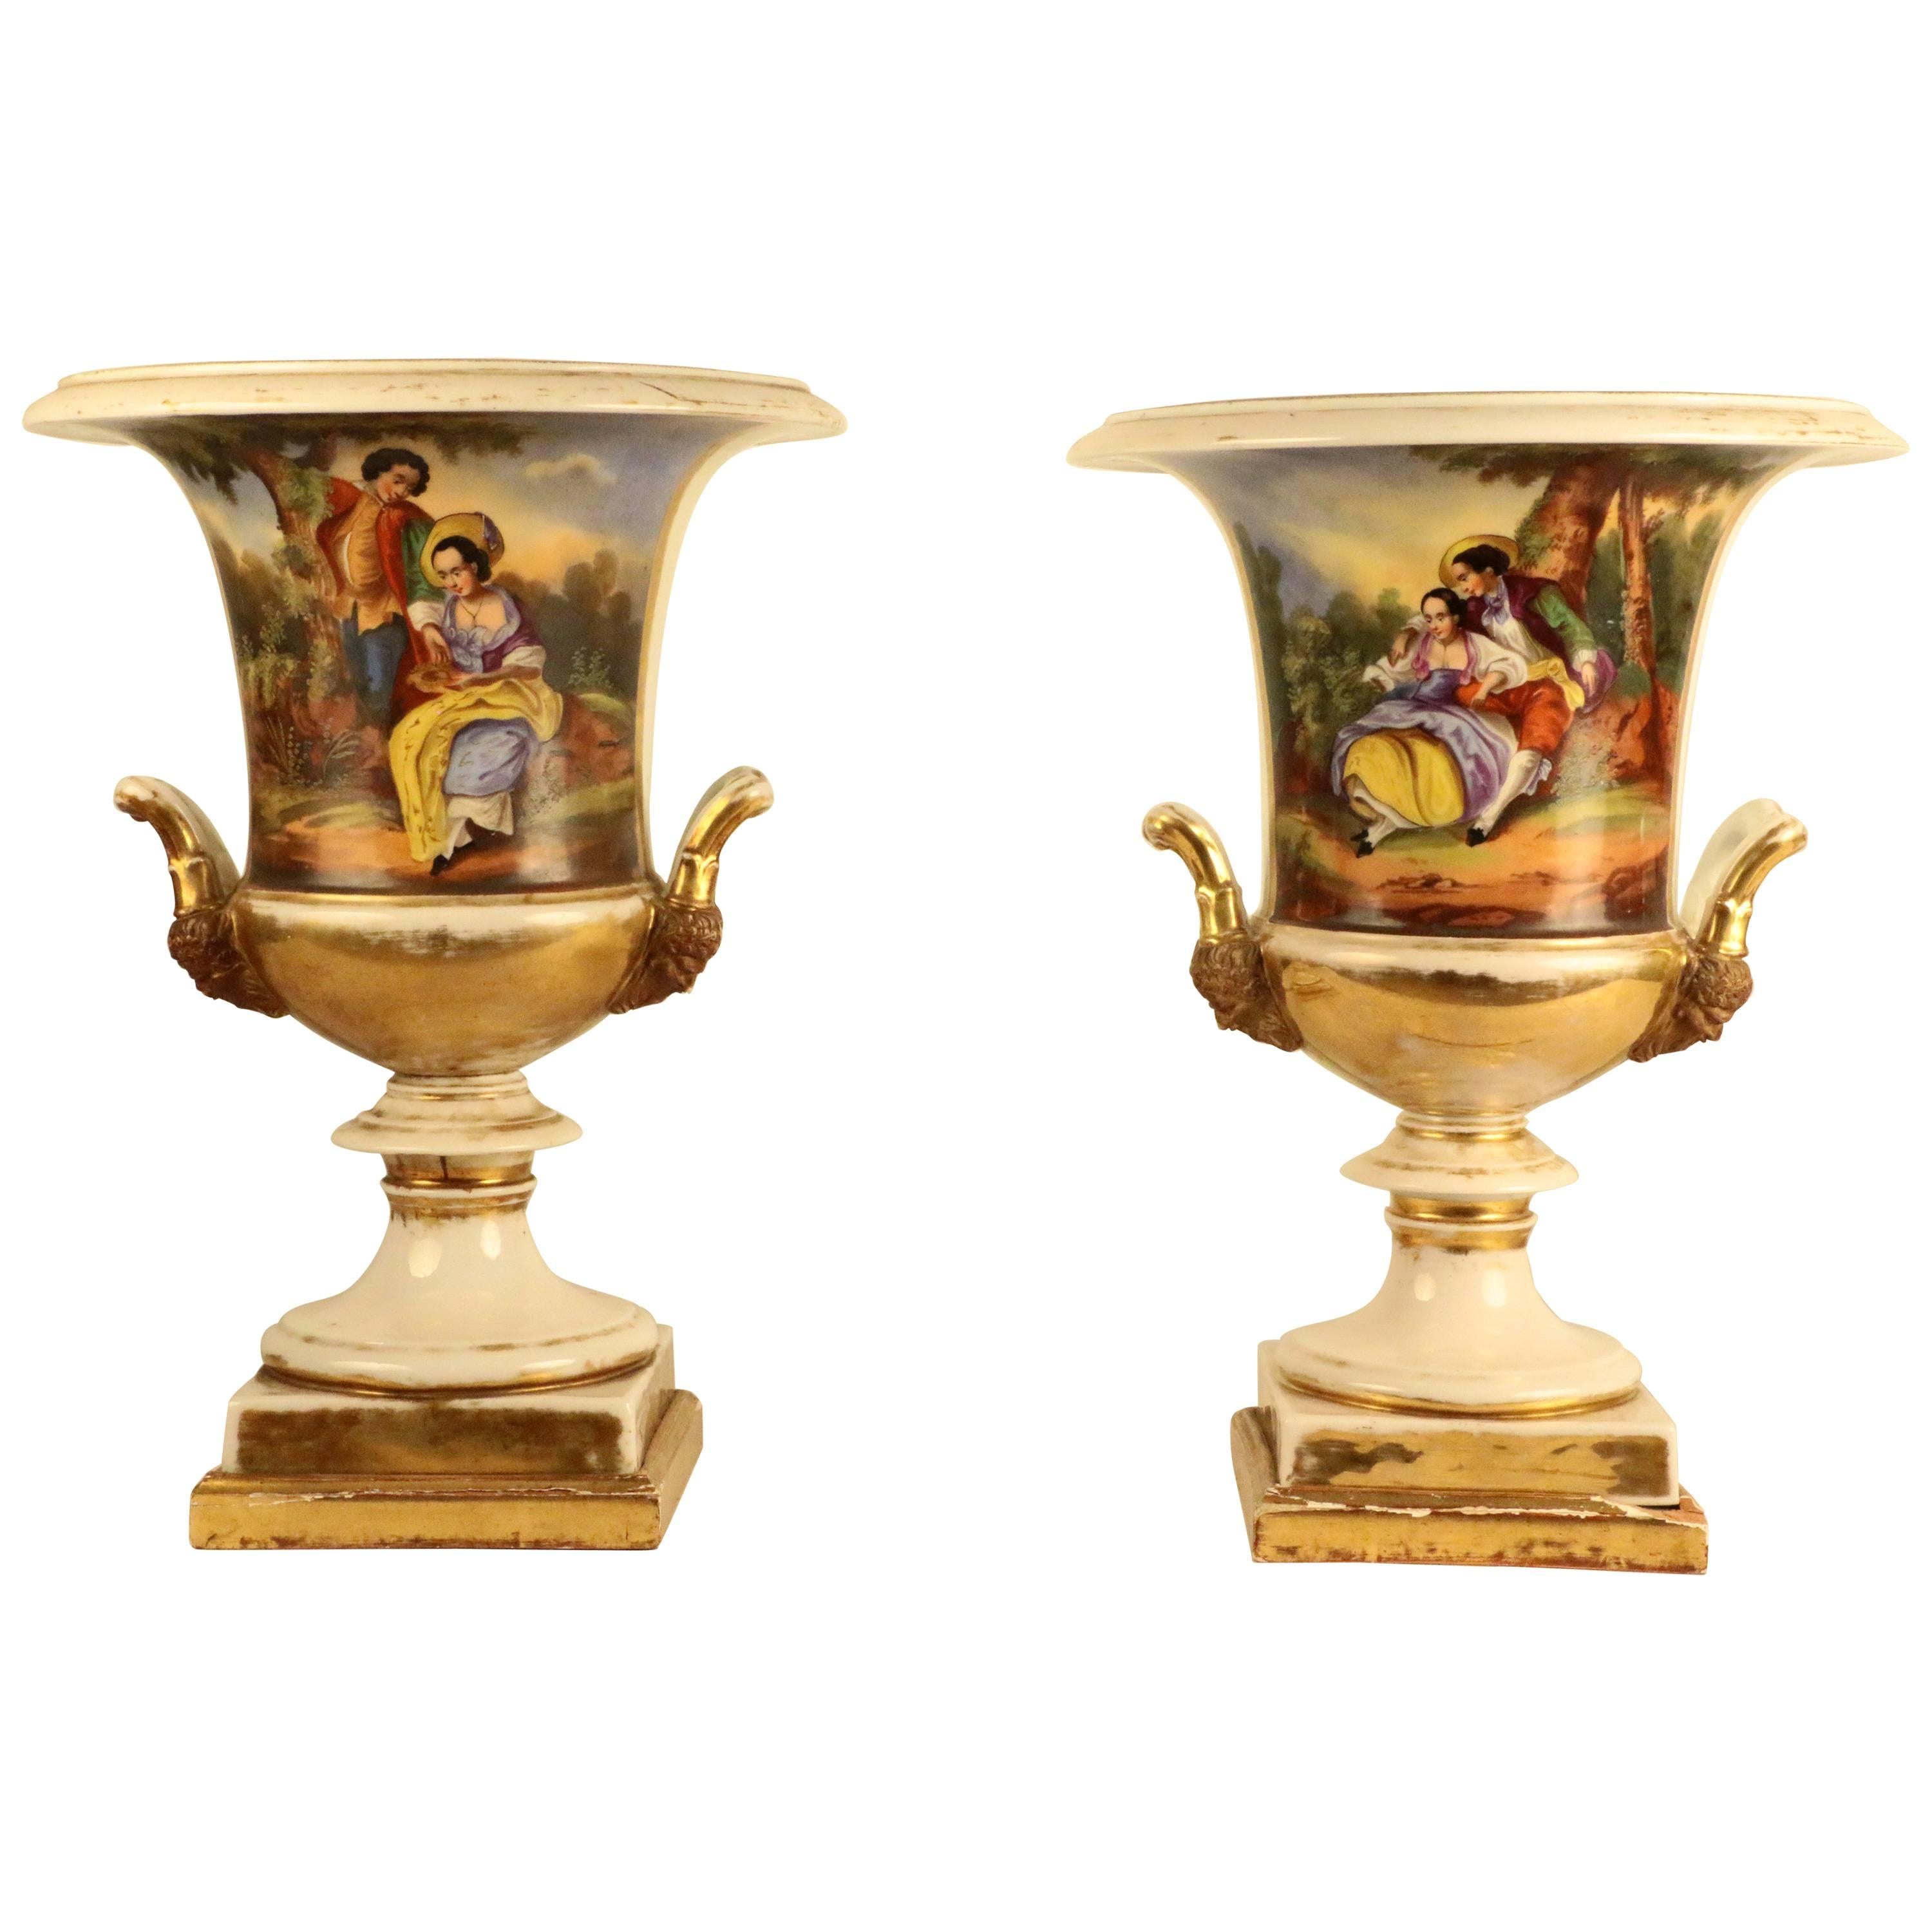 Pair of French Empire Style Gilt Bronze Urns For Sale at 1stDibs